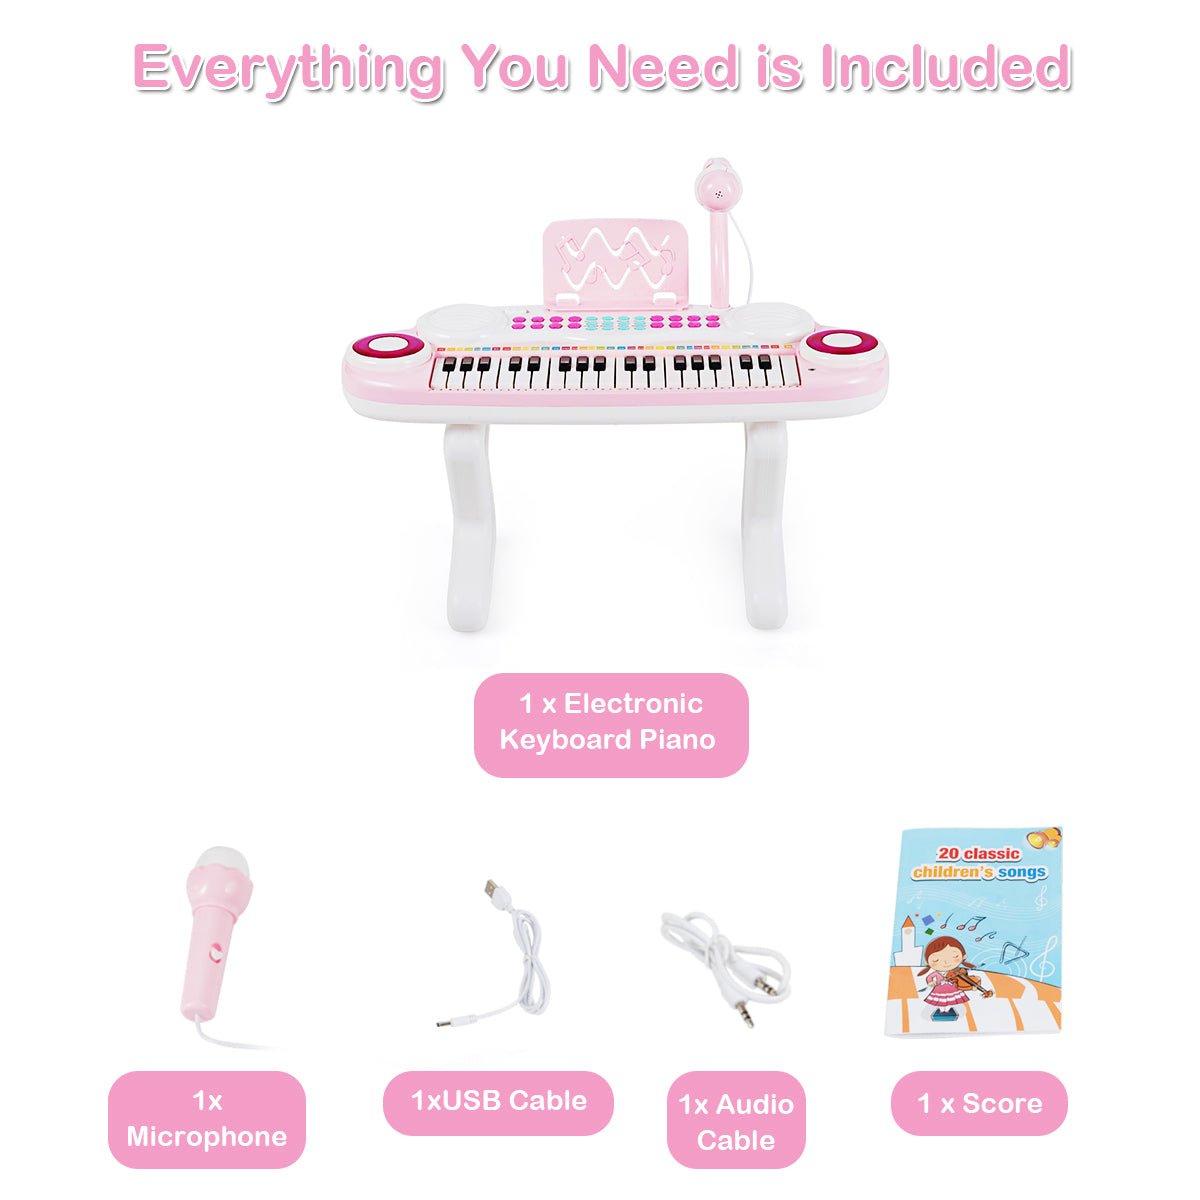 Kids Mega Mart - Your Musical Toy Headquarters in Australia for Pink Keyboards